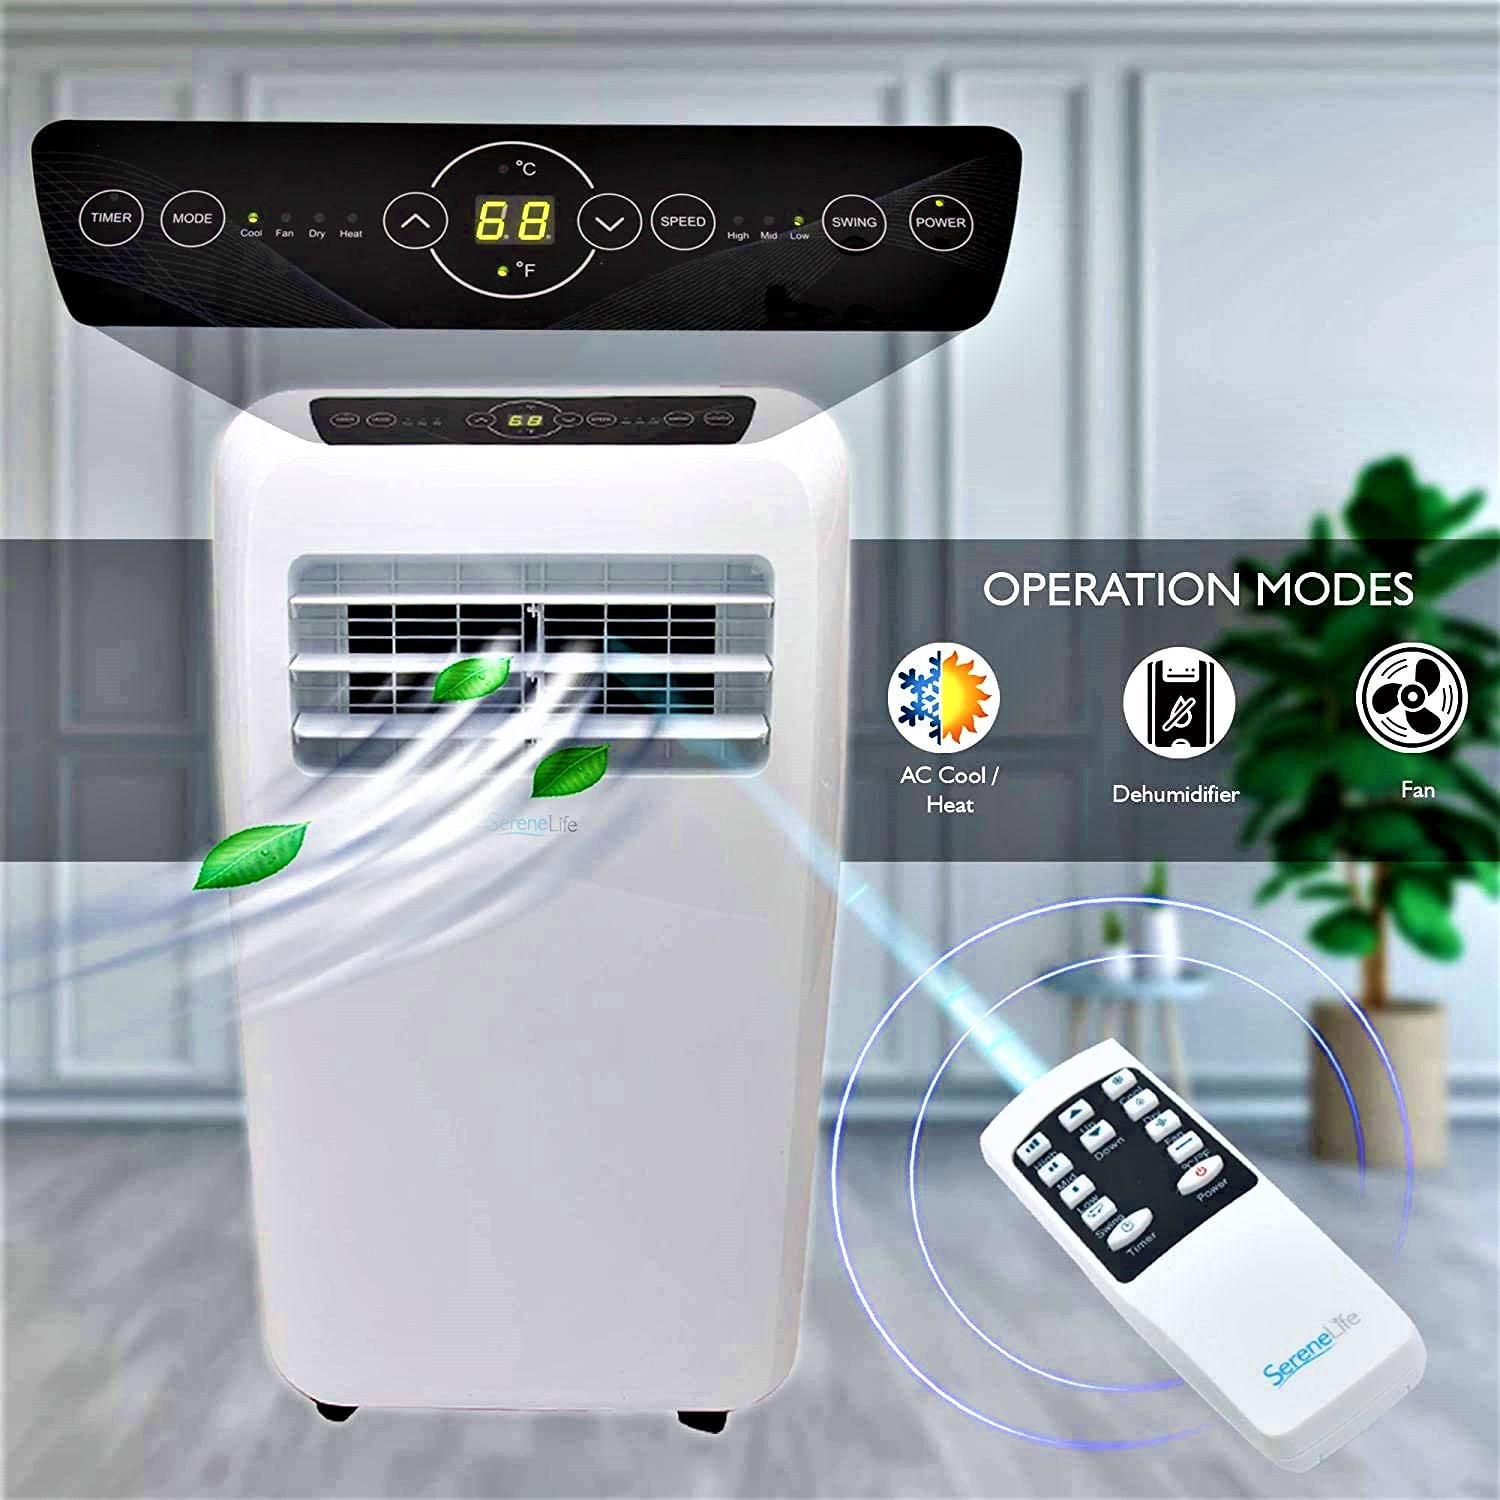 71ESvuPa7gL. AC SL1500 10 BEST AIR CONDITIONERS FOR YOUR GARAGE 2021 REVIEW